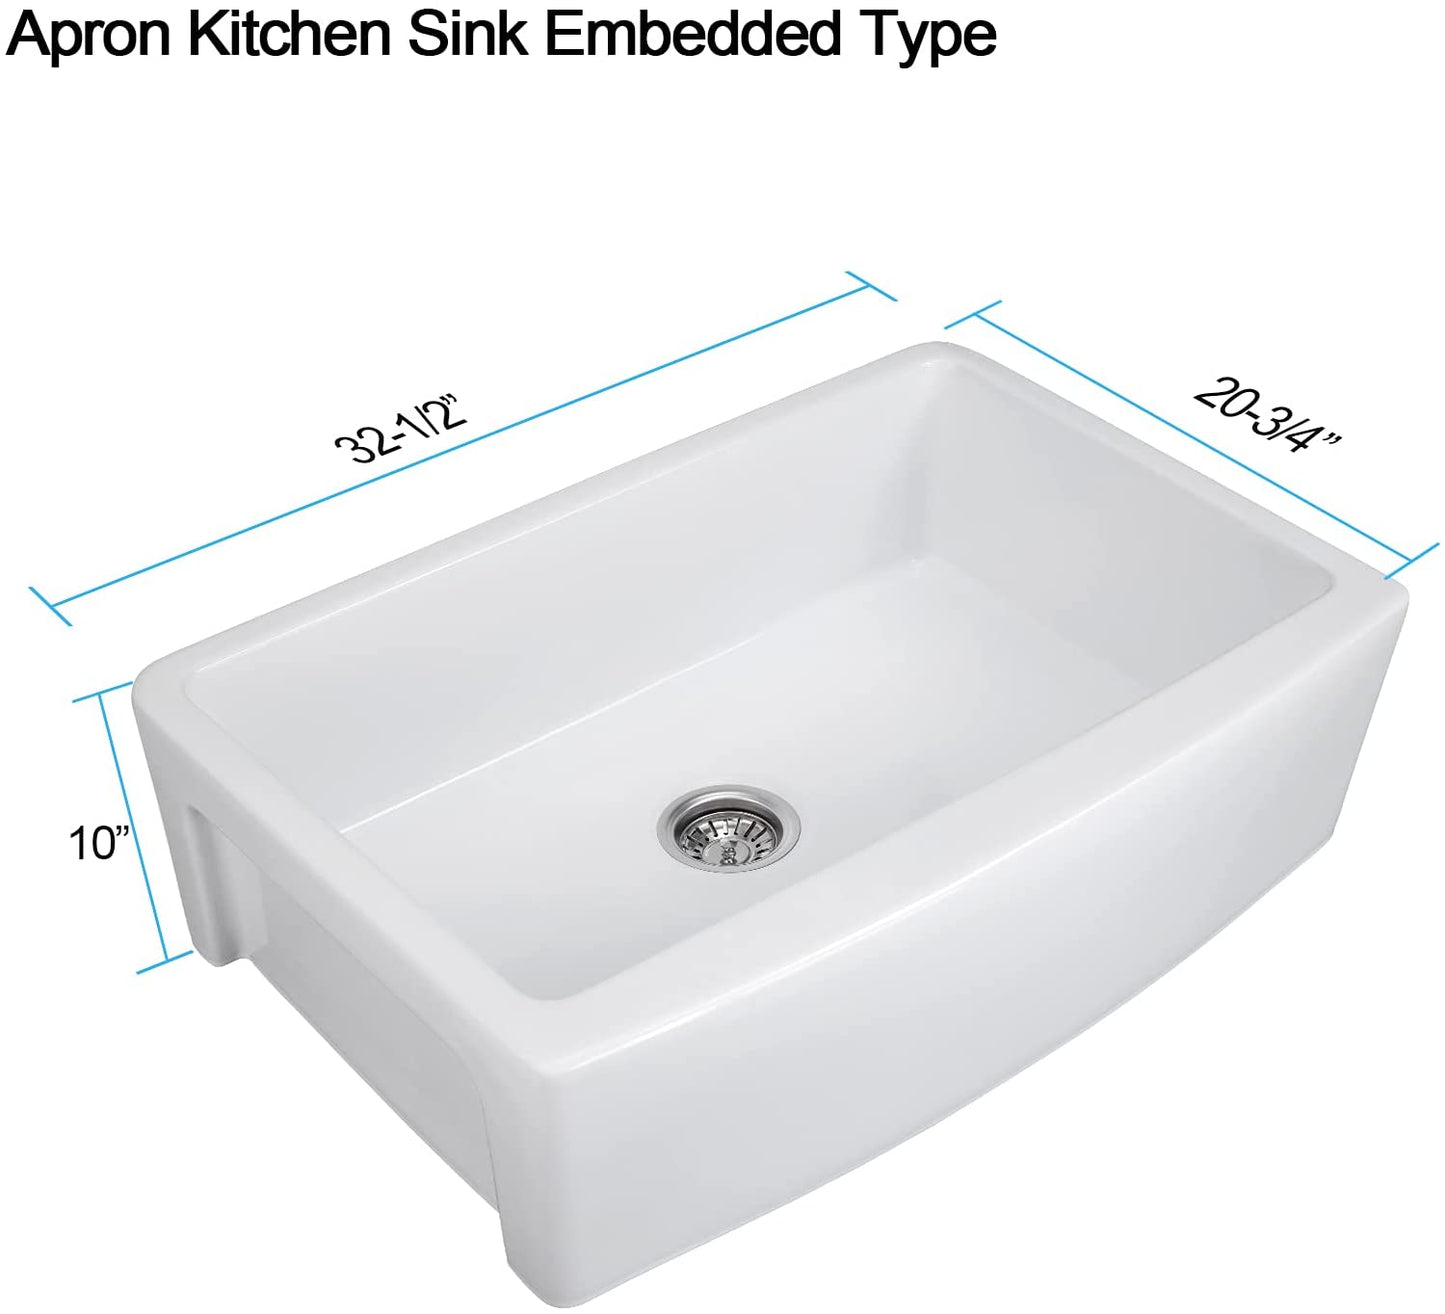 33" X 21" Farmhouse Sink, Fireclay Ceramic Single Bowl Kitchen Sink, White Apron Sink with Protective Bottom Grid and Strainer